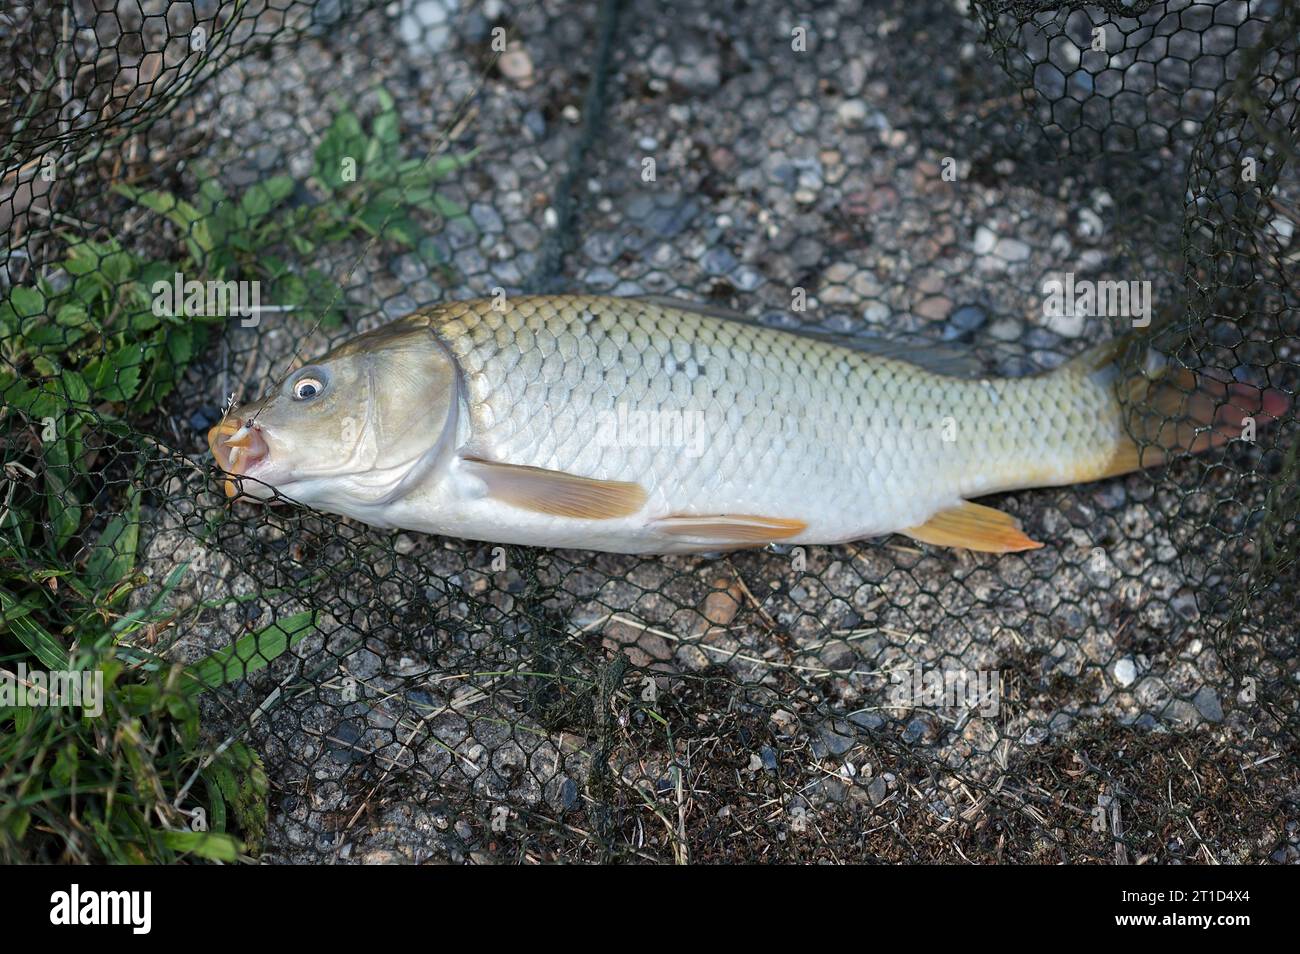 Carp fishing on the river bank. Close-up of freshwater fish. Stock Photo